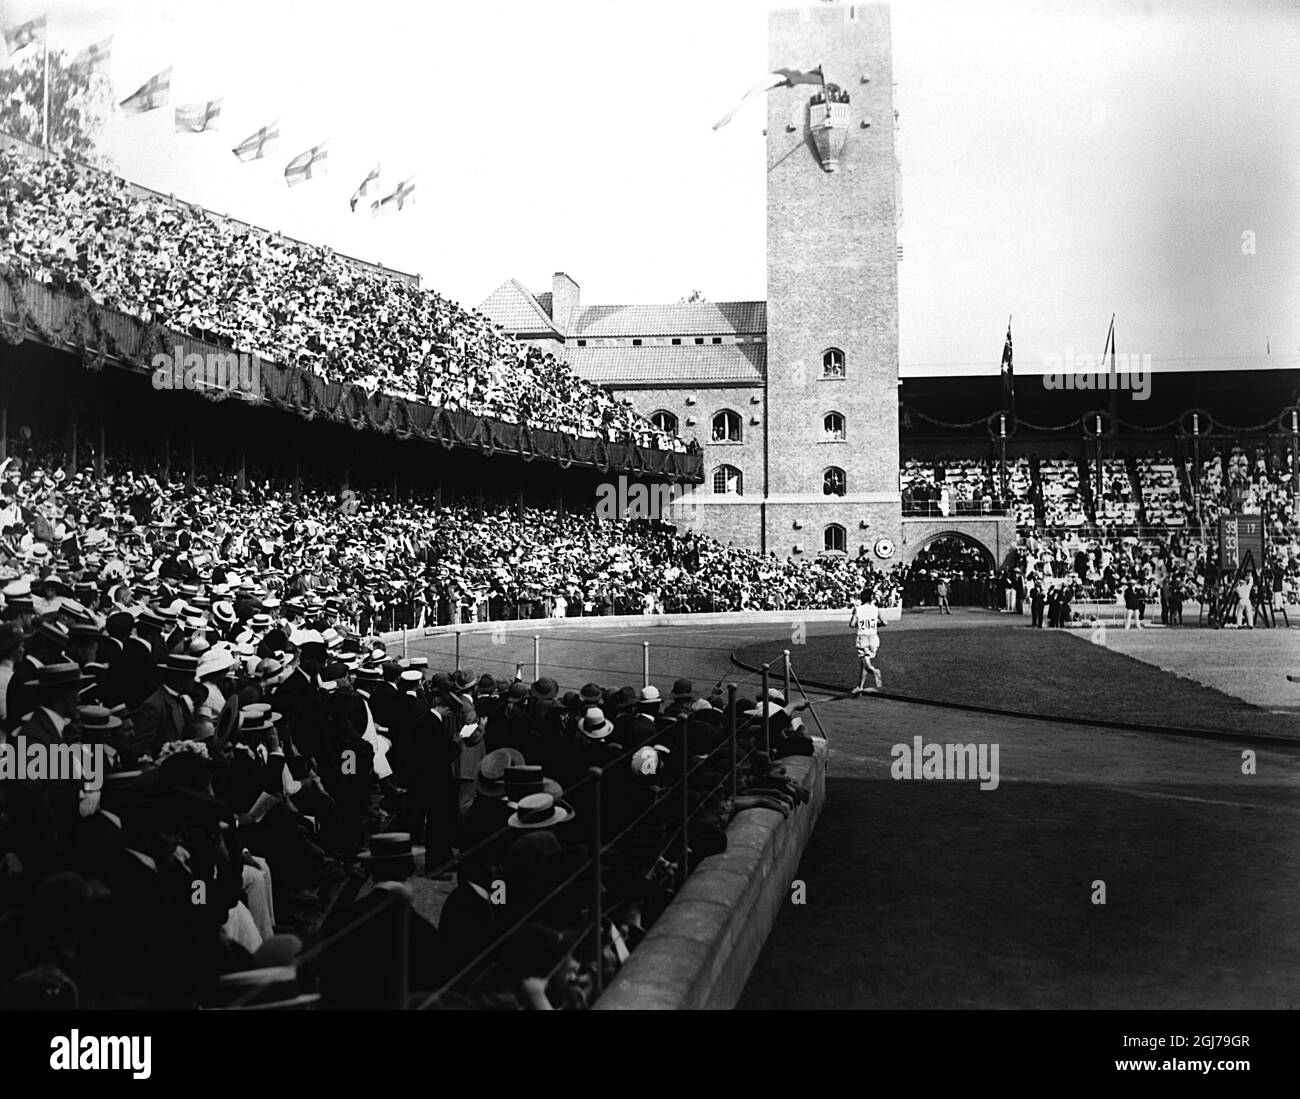 FILE 1912 The Marathon winner Kenneth McArthur from South Africa meets a crowded Stadium in Stockholm at the olympics 1912. Foto:Scanpix Historical/ Kod:1900 Scanpix SWEDEN s. Stock Photo